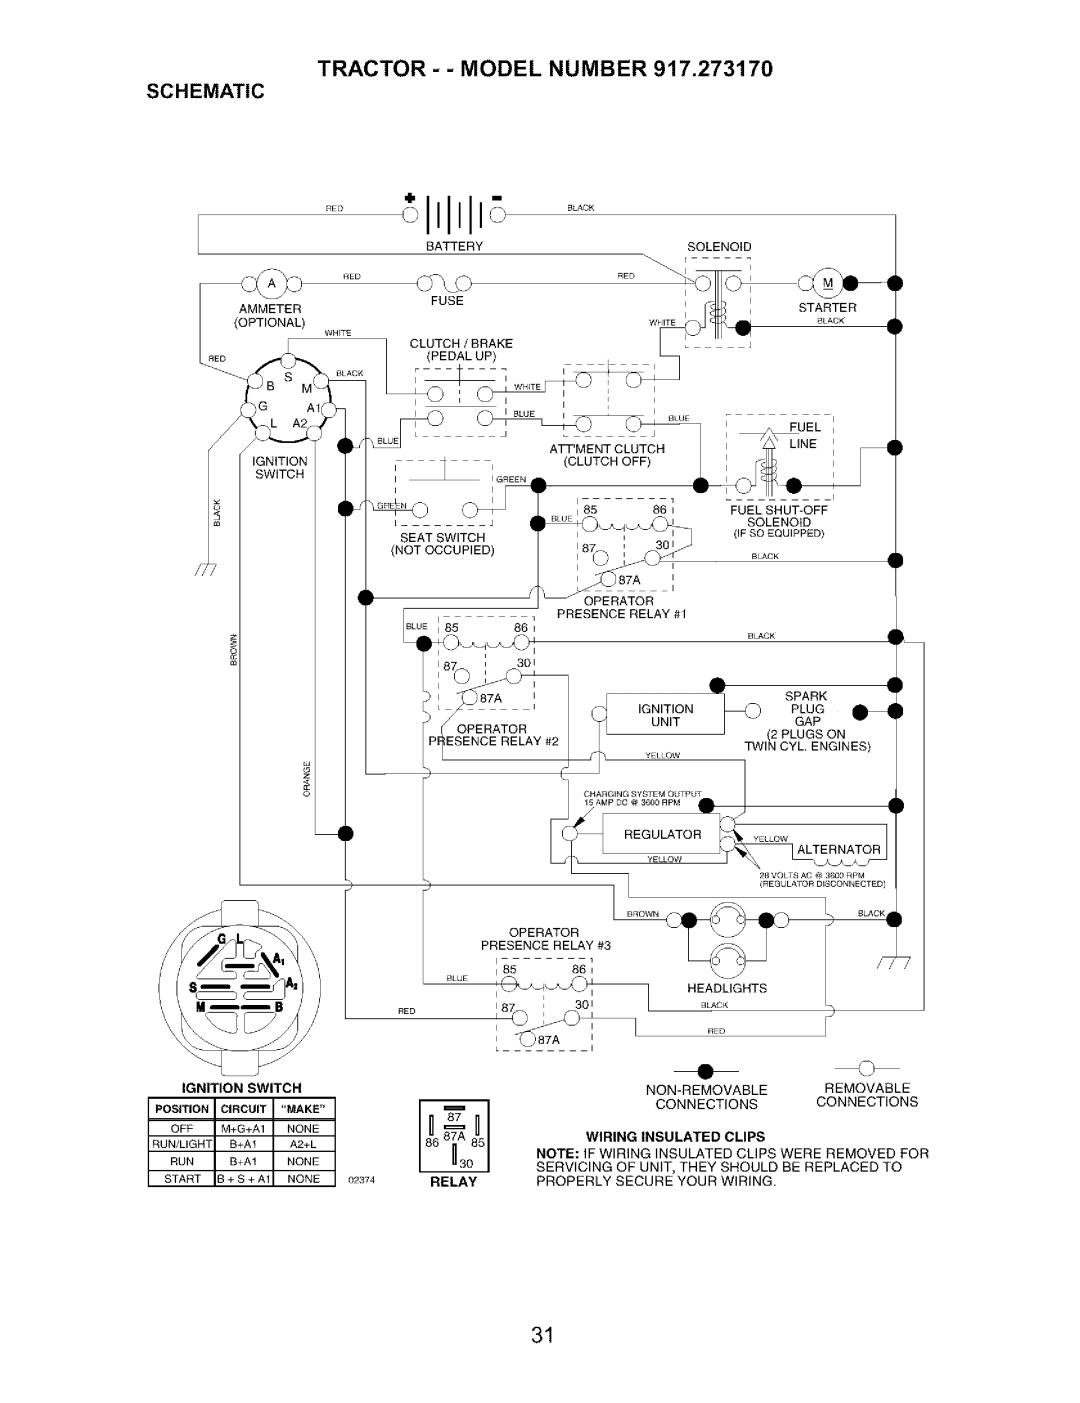 Craftsman 917.27317 owner manual SEATSW,TONIi, Tractor - - Model Number Schematic, Wiring Insulated Clips 